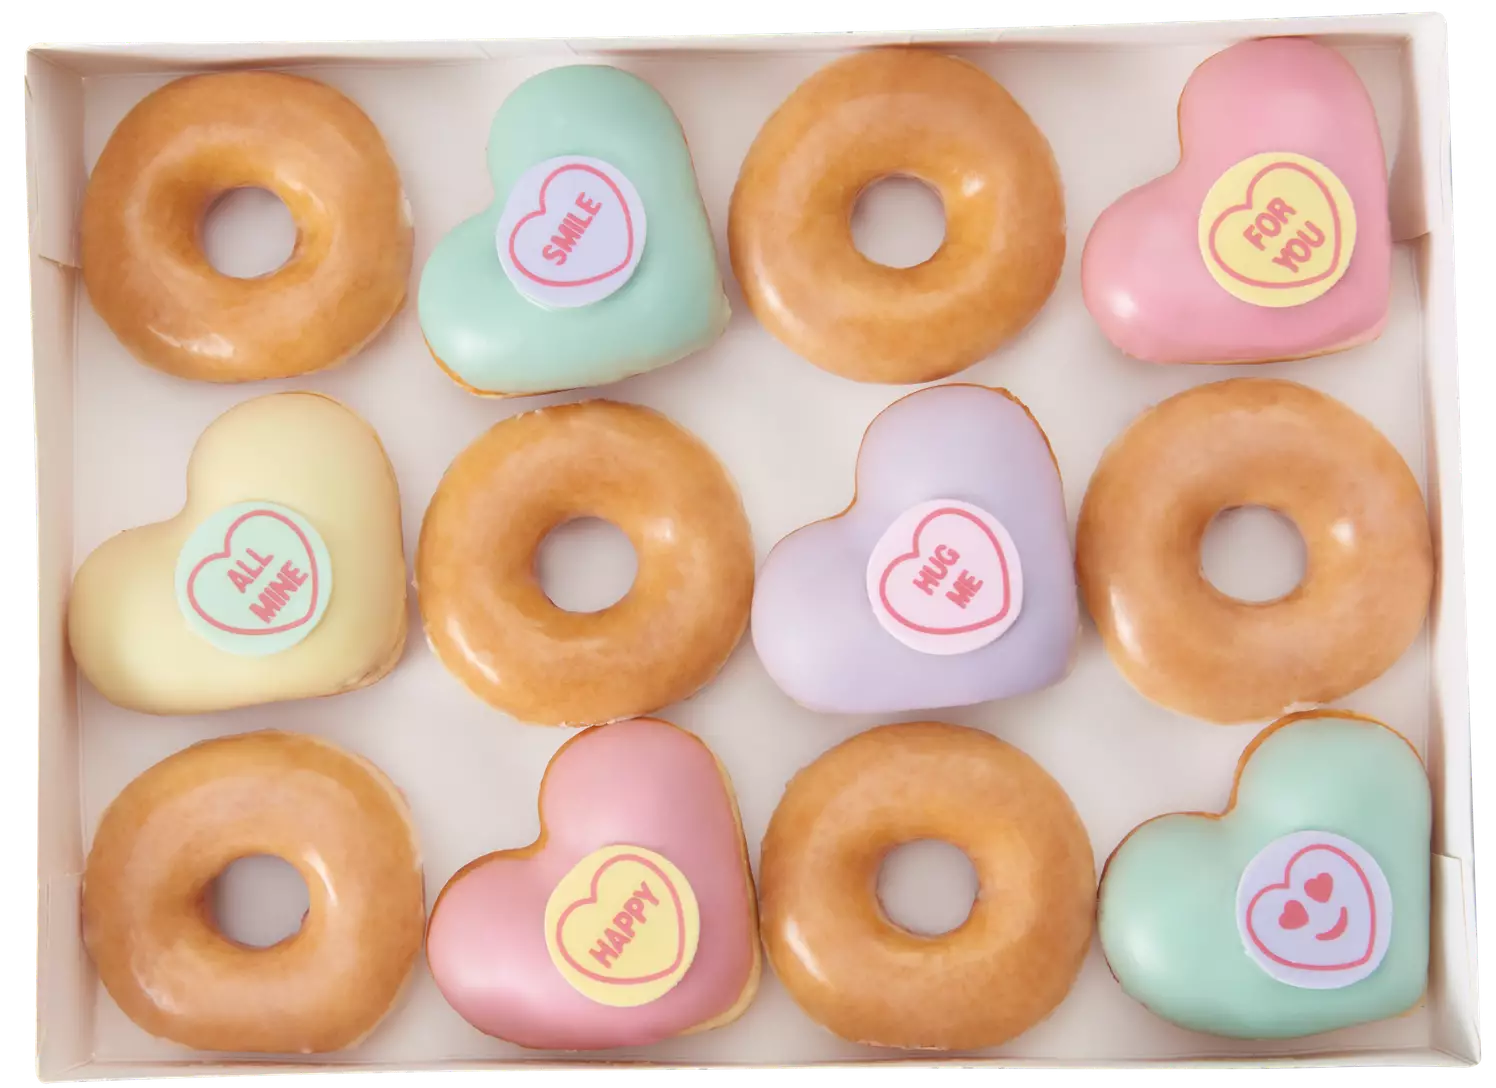 You can get the doughnuts as part of a Valentine's Dozen (